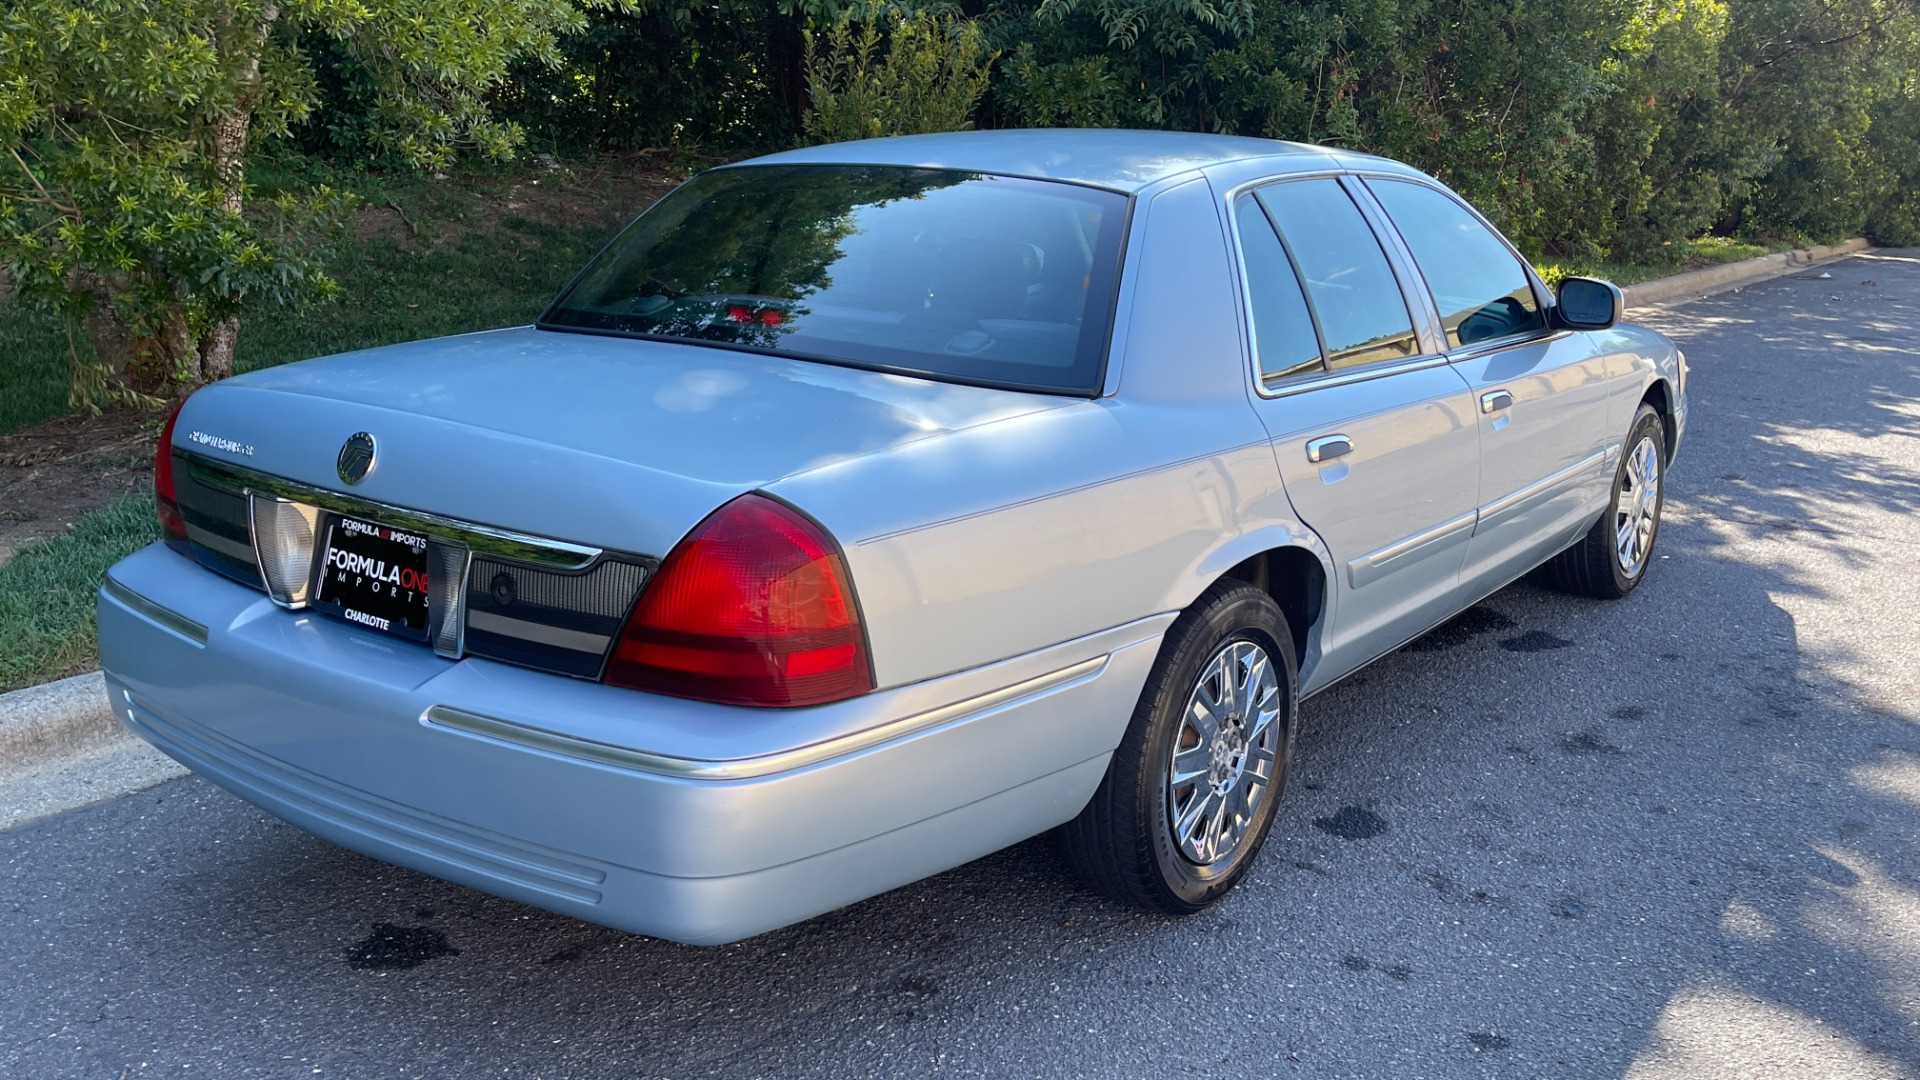 Used 2008 Mercury Grand Marquis GS / KEYLESS ENTRY / 8 WAY DRIVER SEAT / GS CONFIDENCE for sale $11,999 at Formula Imports in Charlotte NC 28227 3